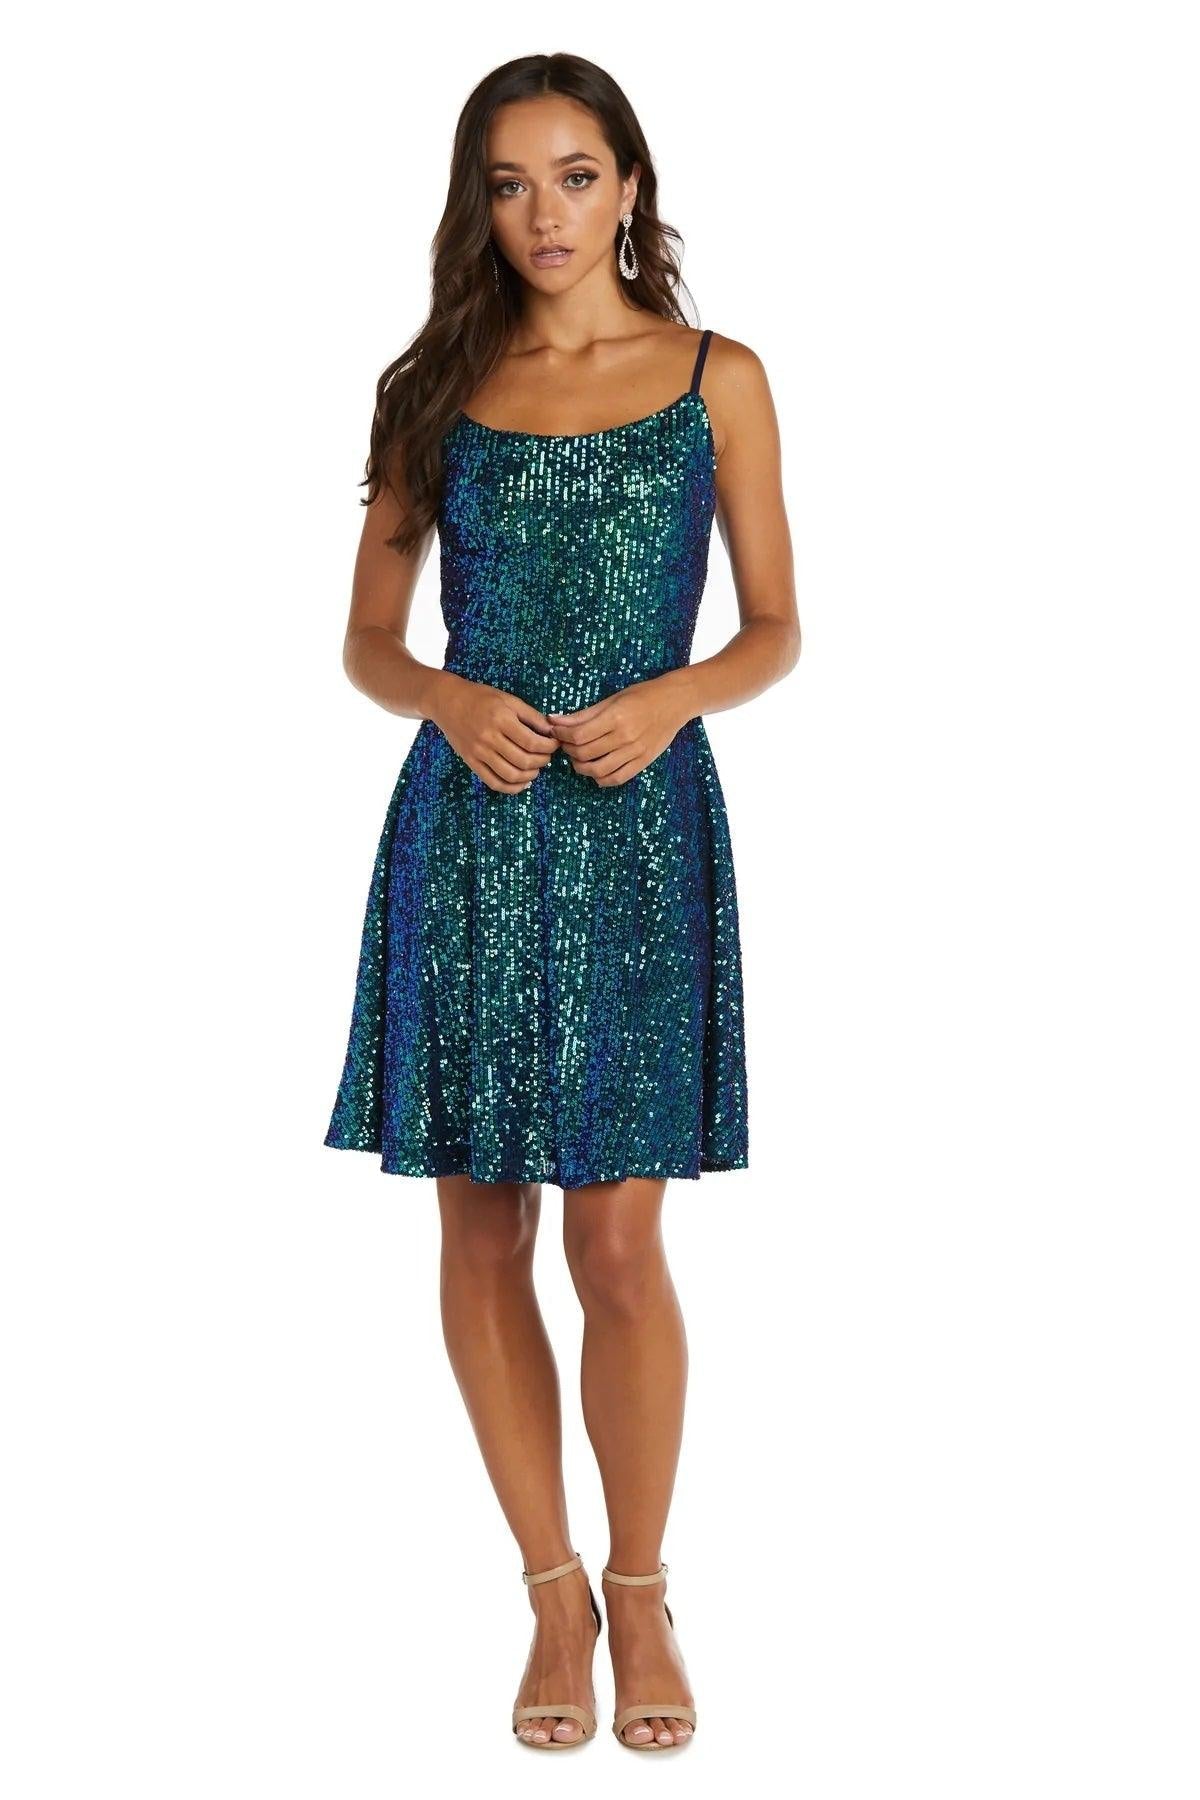 Navy/Teal Morgan & Co 12904 Homecoming Short Prom Dress for $89.99 ...